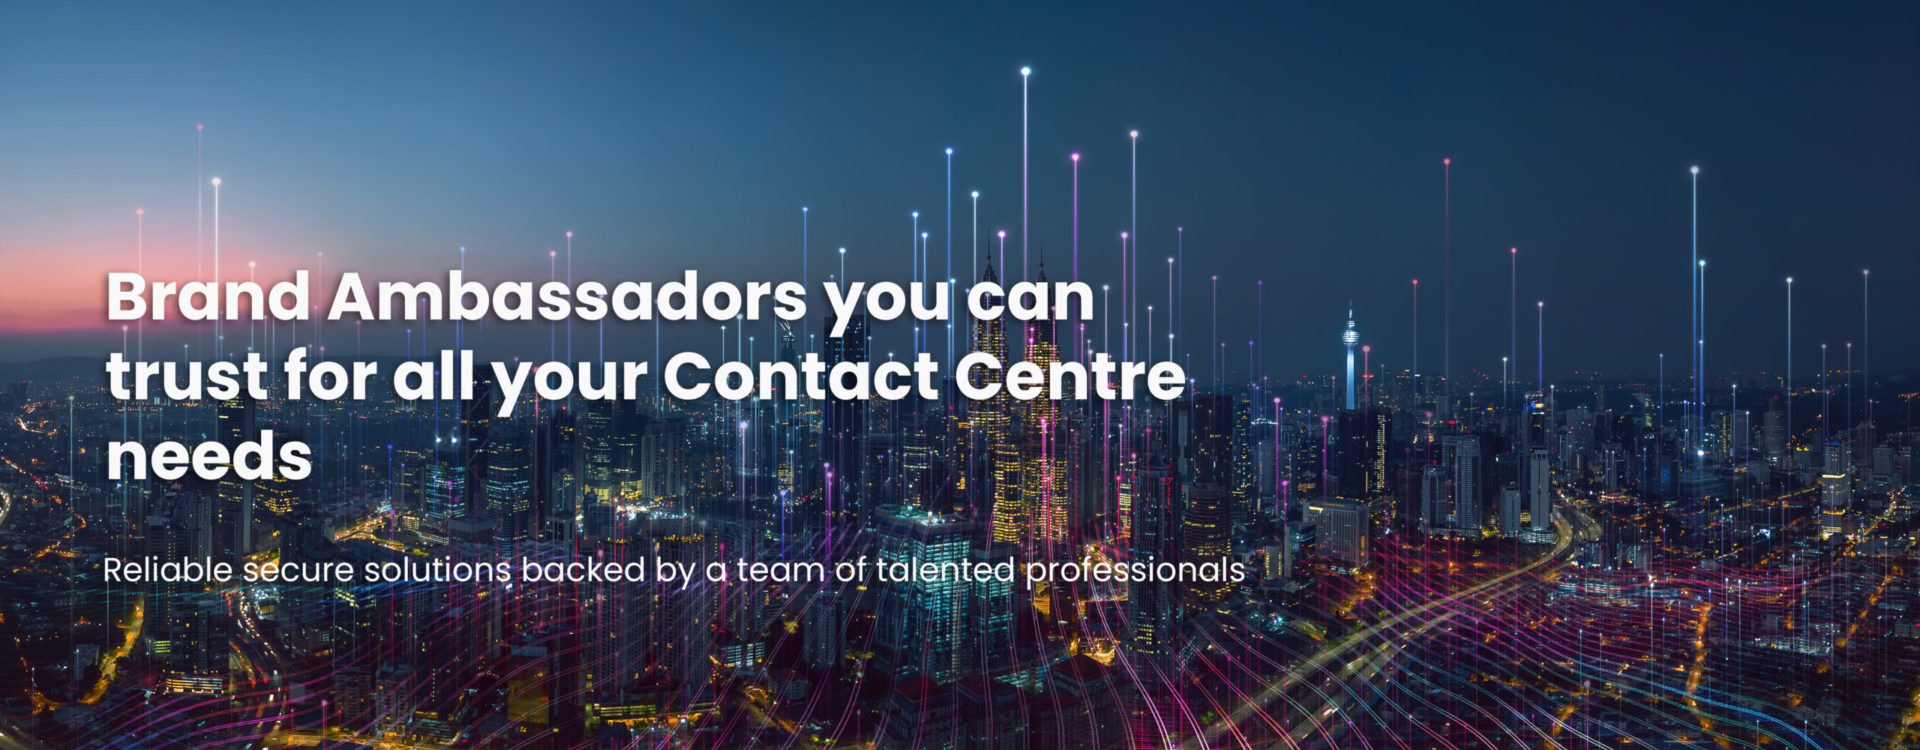 Cityscape with text Brand Ambassadors you can trust for all your contact centre needs